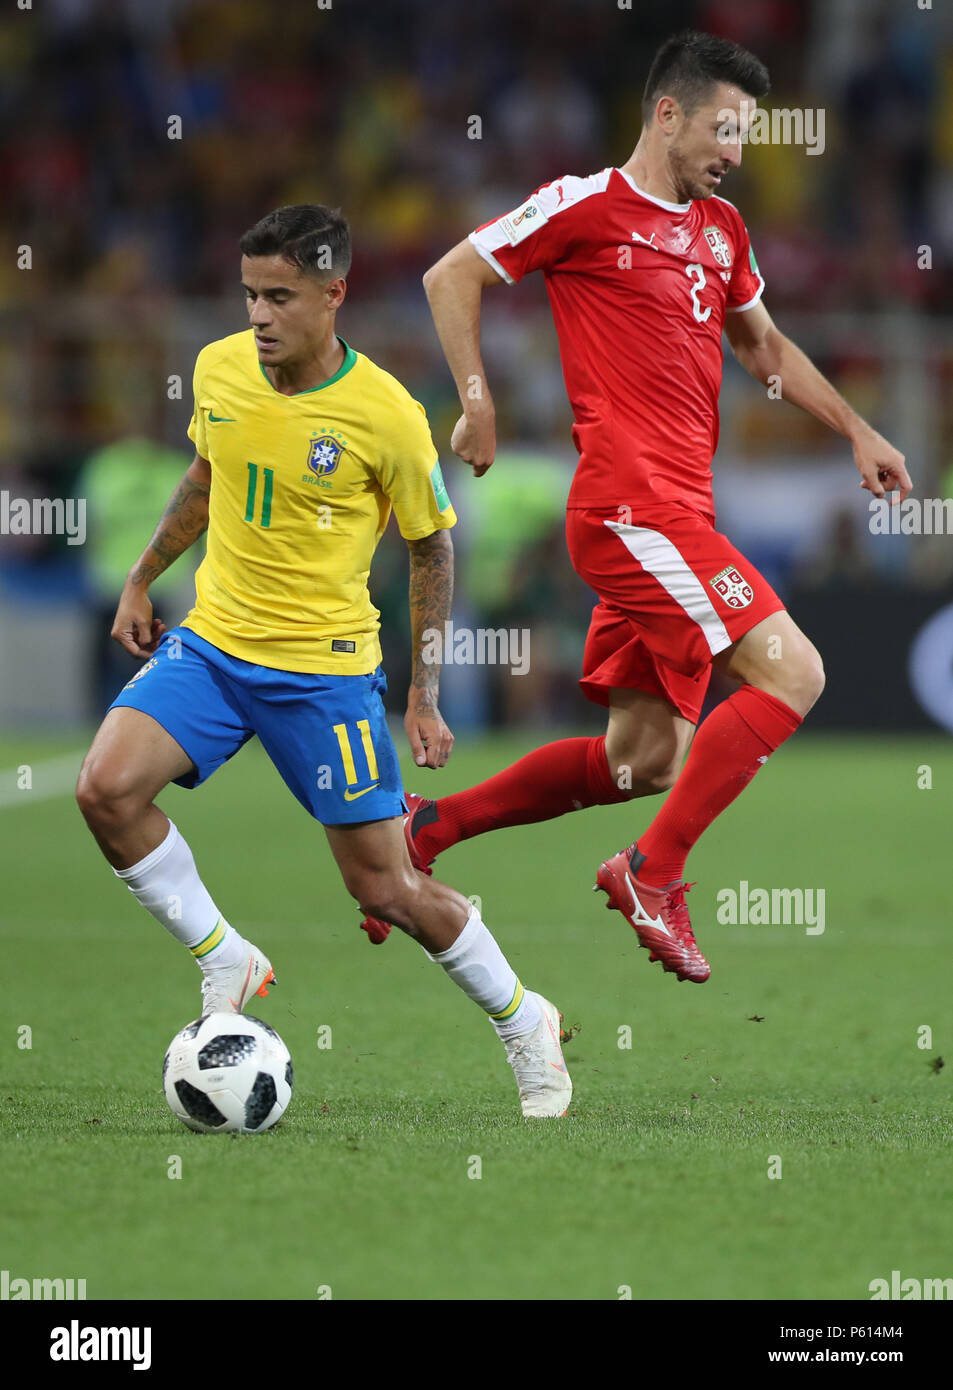 Moscow, Russia. 27th June, 2018. Philippe Coutinho (L) of Brazil vies with Antonio Rukavina of Serbia during the 2018 FIFA World Cup Group E match between Serbia and Brazil in Moscow, Russia, June 27, 2018. Brazil won 2-0 and advanced to the round of 16. Credit: Xu Zijian/Xinhua/Alamy Live News Stock Photo